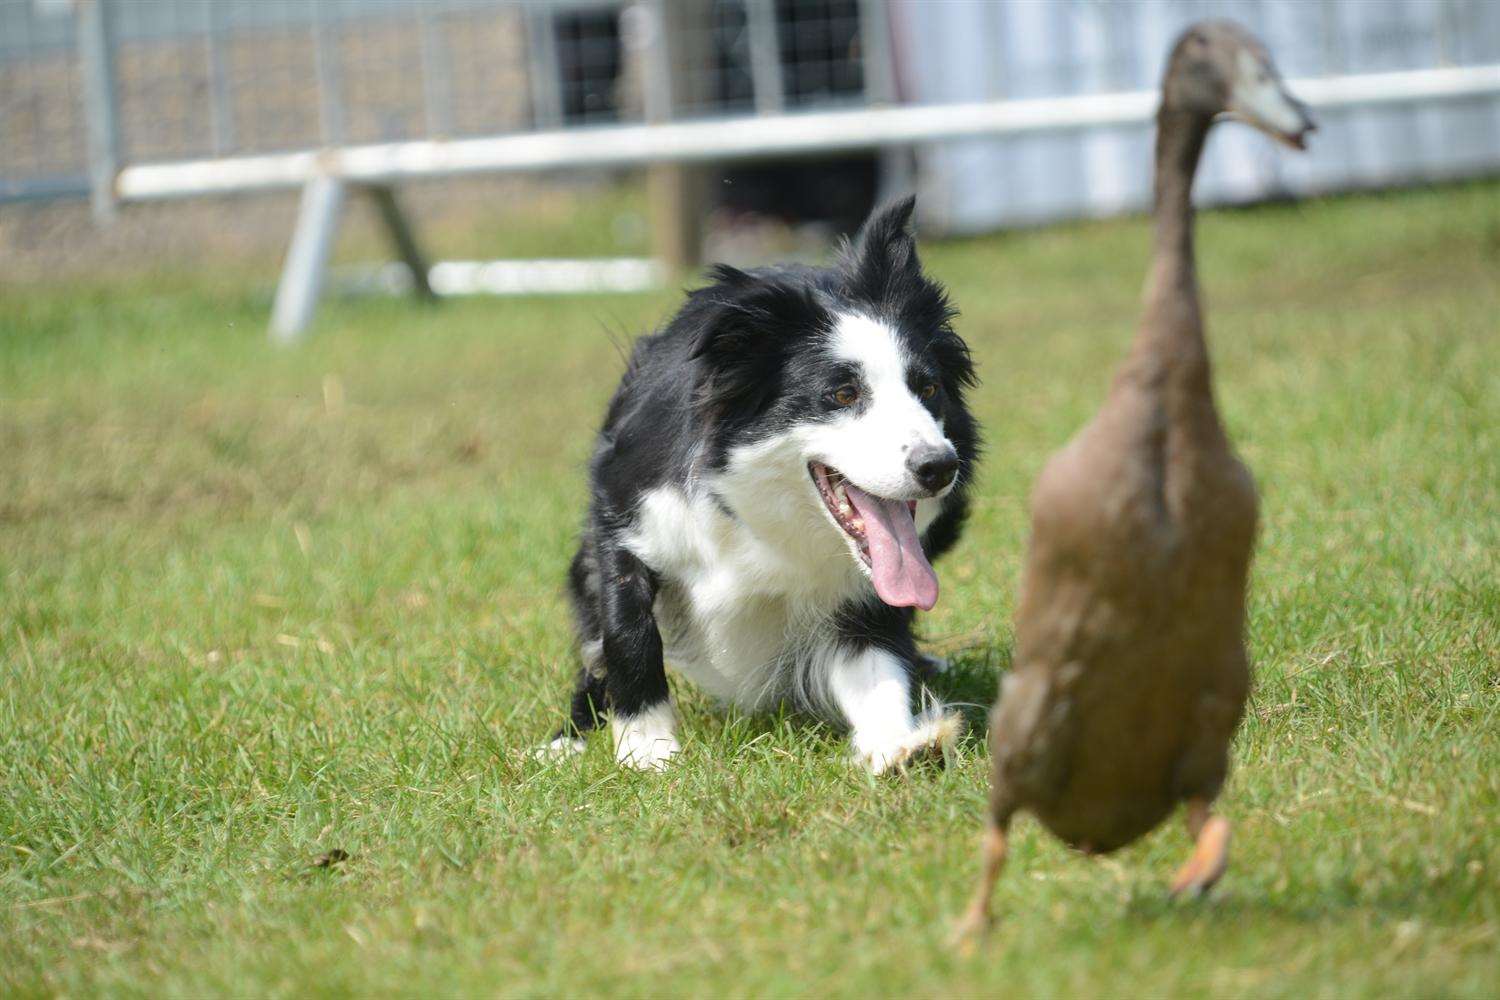 Among the Kent County Show entertainment was the Dog and Ducks show with Chris Hupp and ‘Boots’ from Romney Marsh